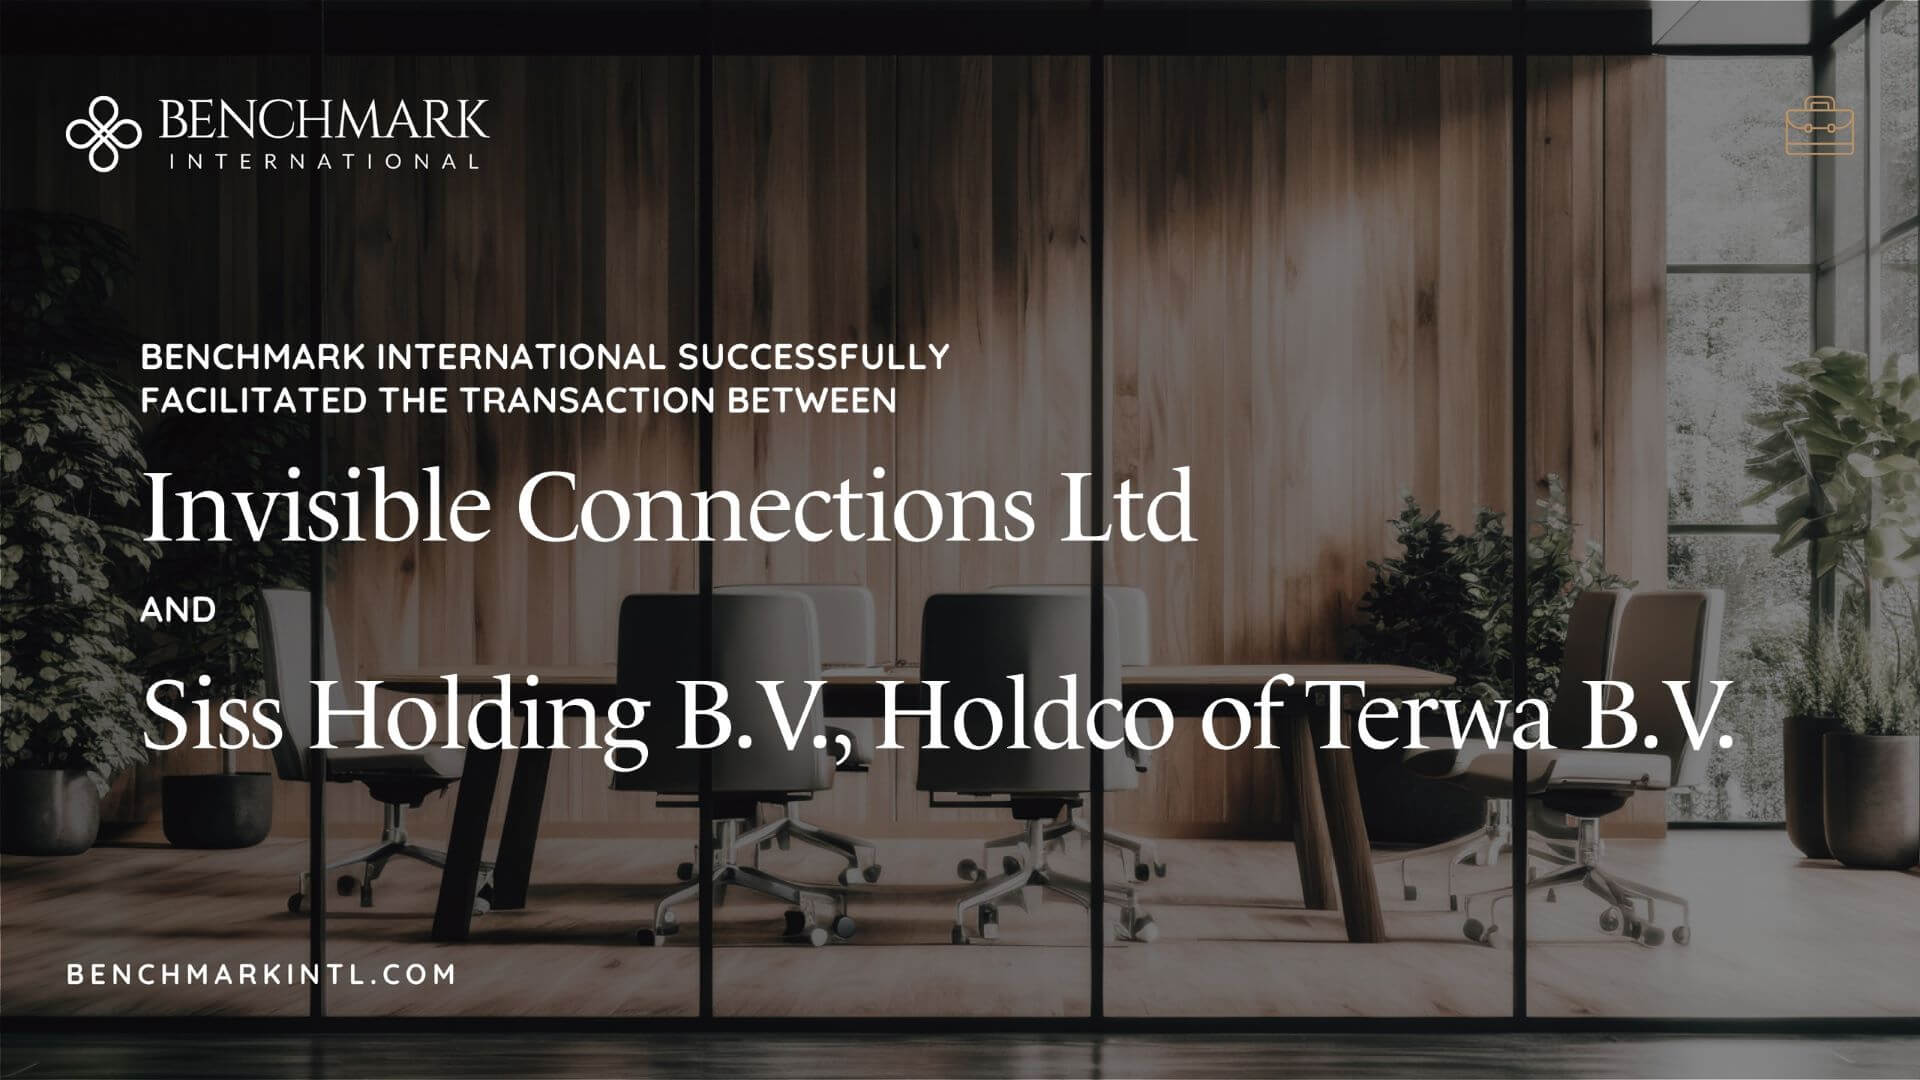 Benchmark International Successfully Facilitated the Transaction Between Invisible Connections Ltd and Siss Holding B.V., Holdco of Terwa B.V.